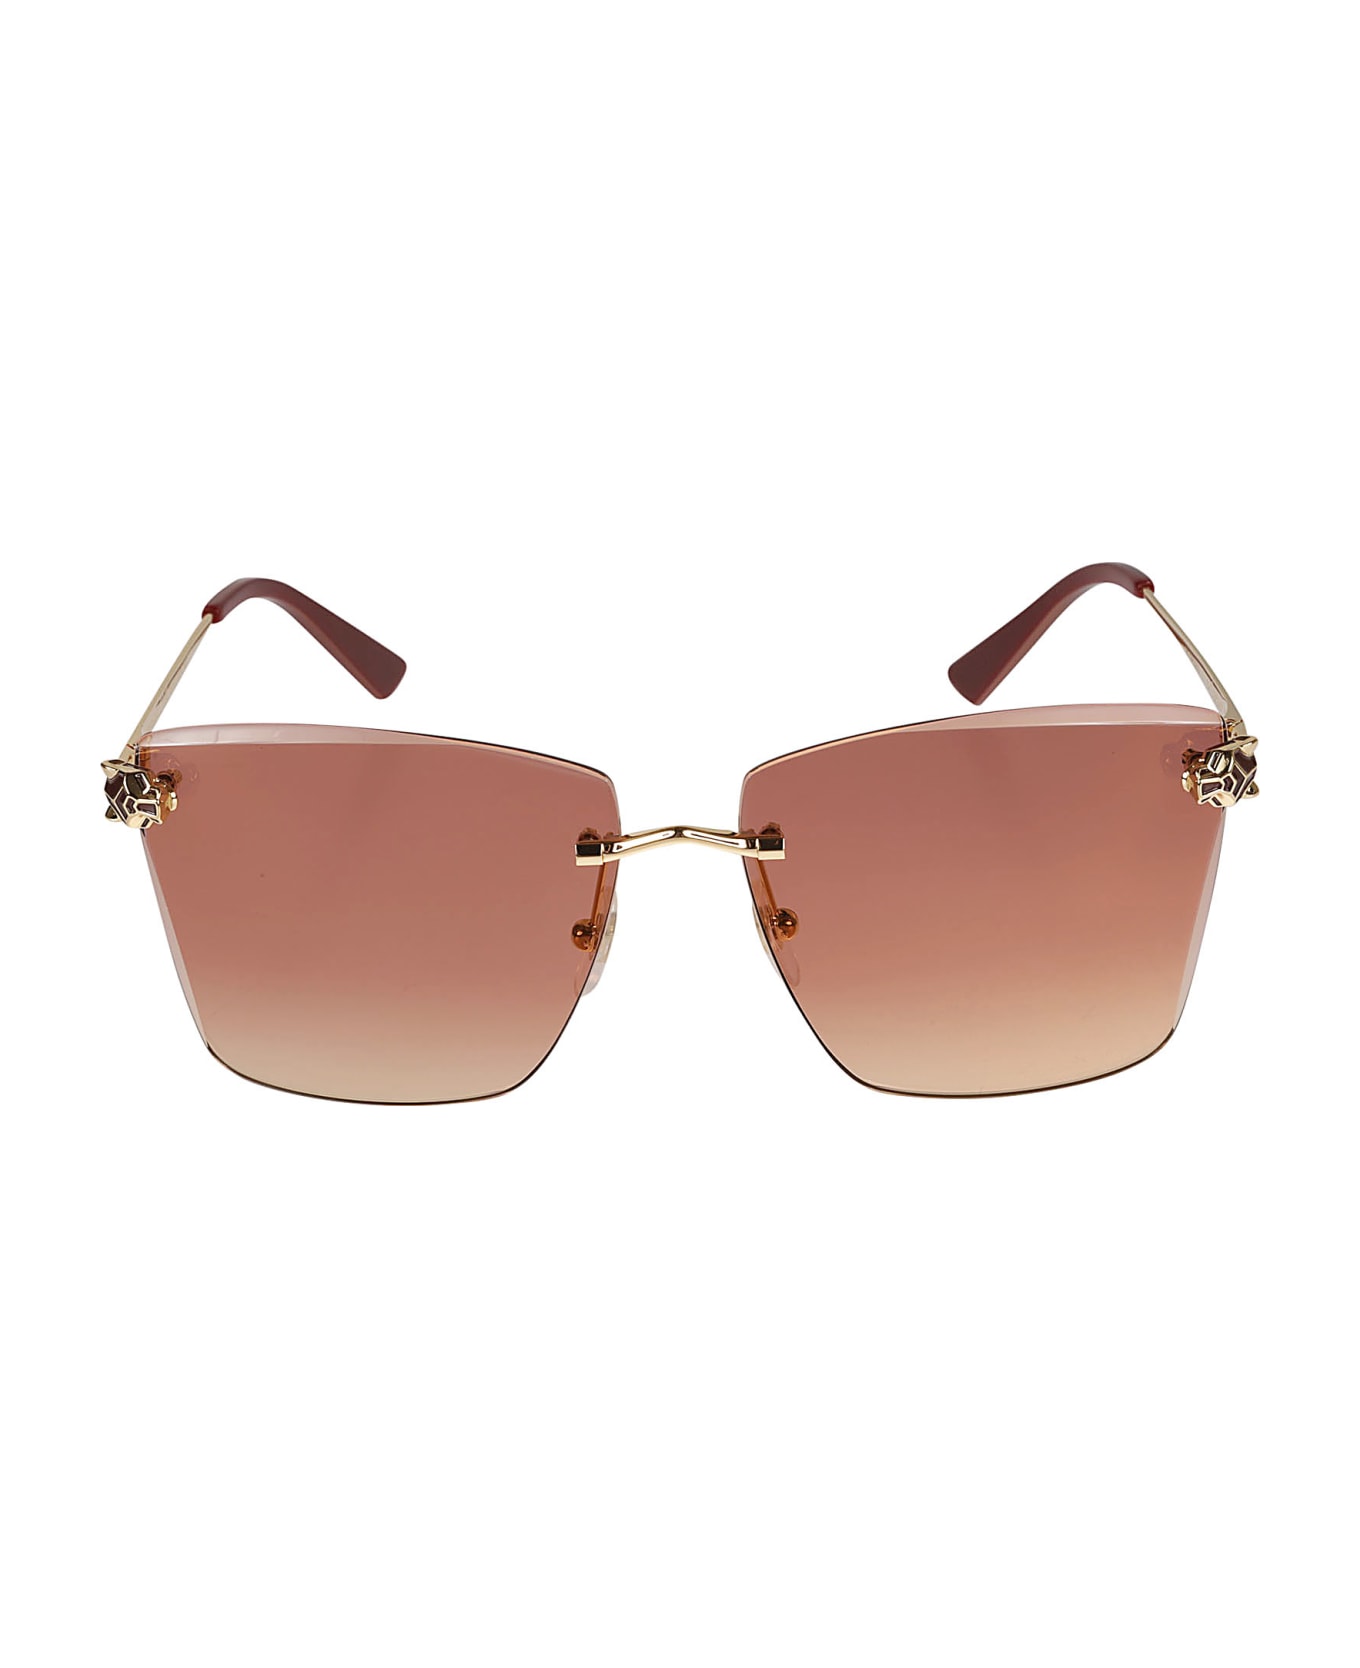 Cartier Eyewear Square Patterned Sunglasses - Gold